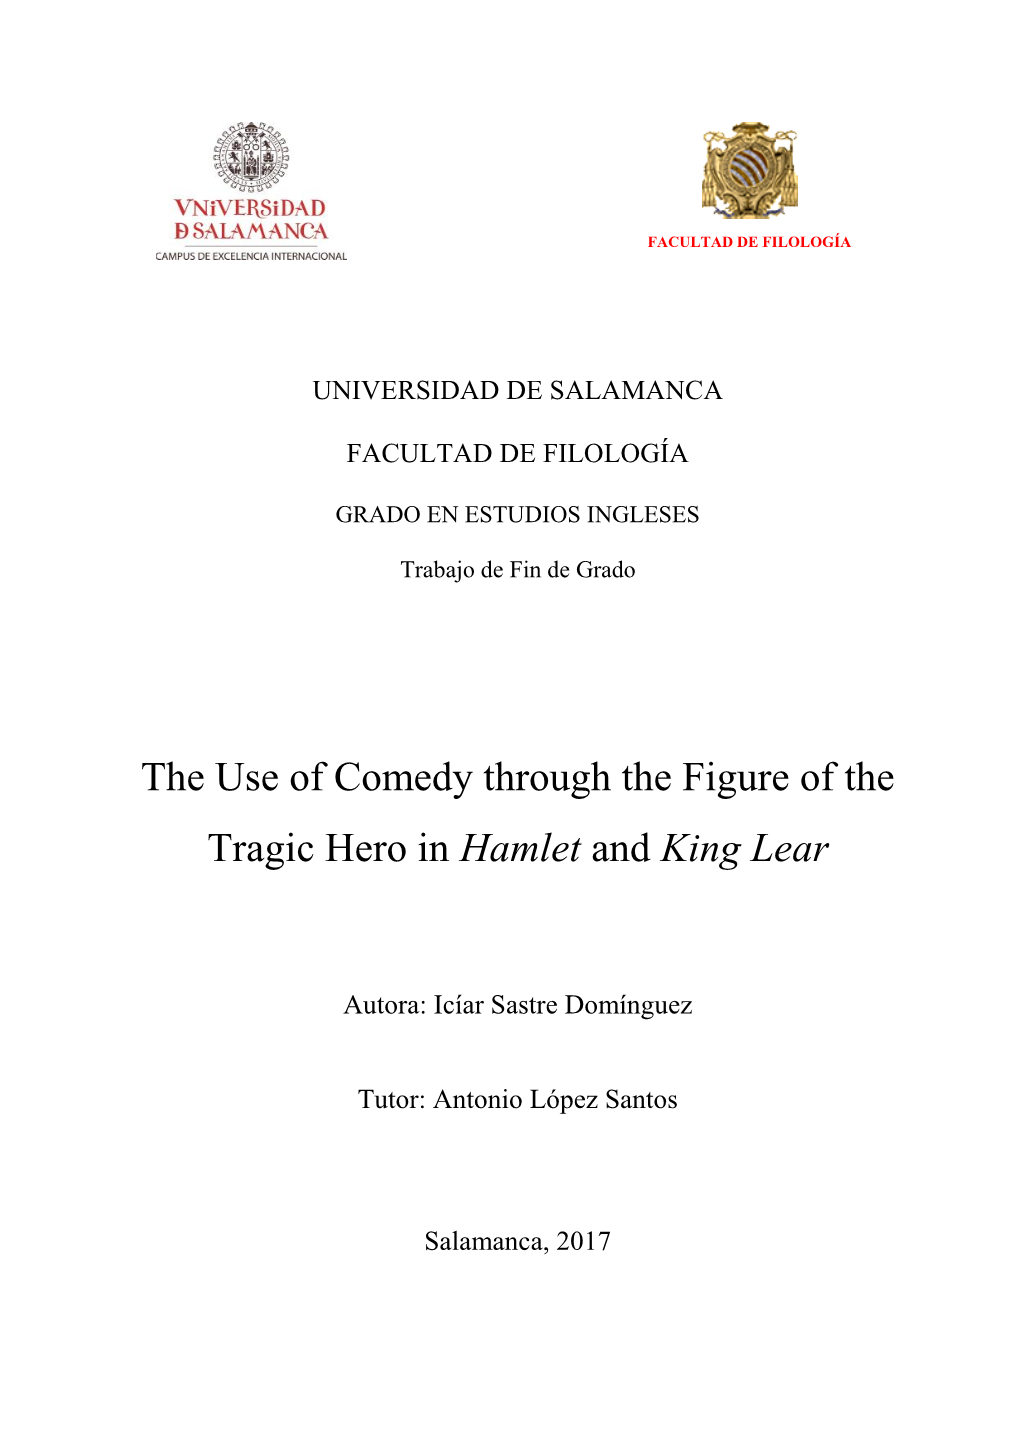 The Use of Comedy Through the Figure of the Tragic Hero in Hamlet and King Lear